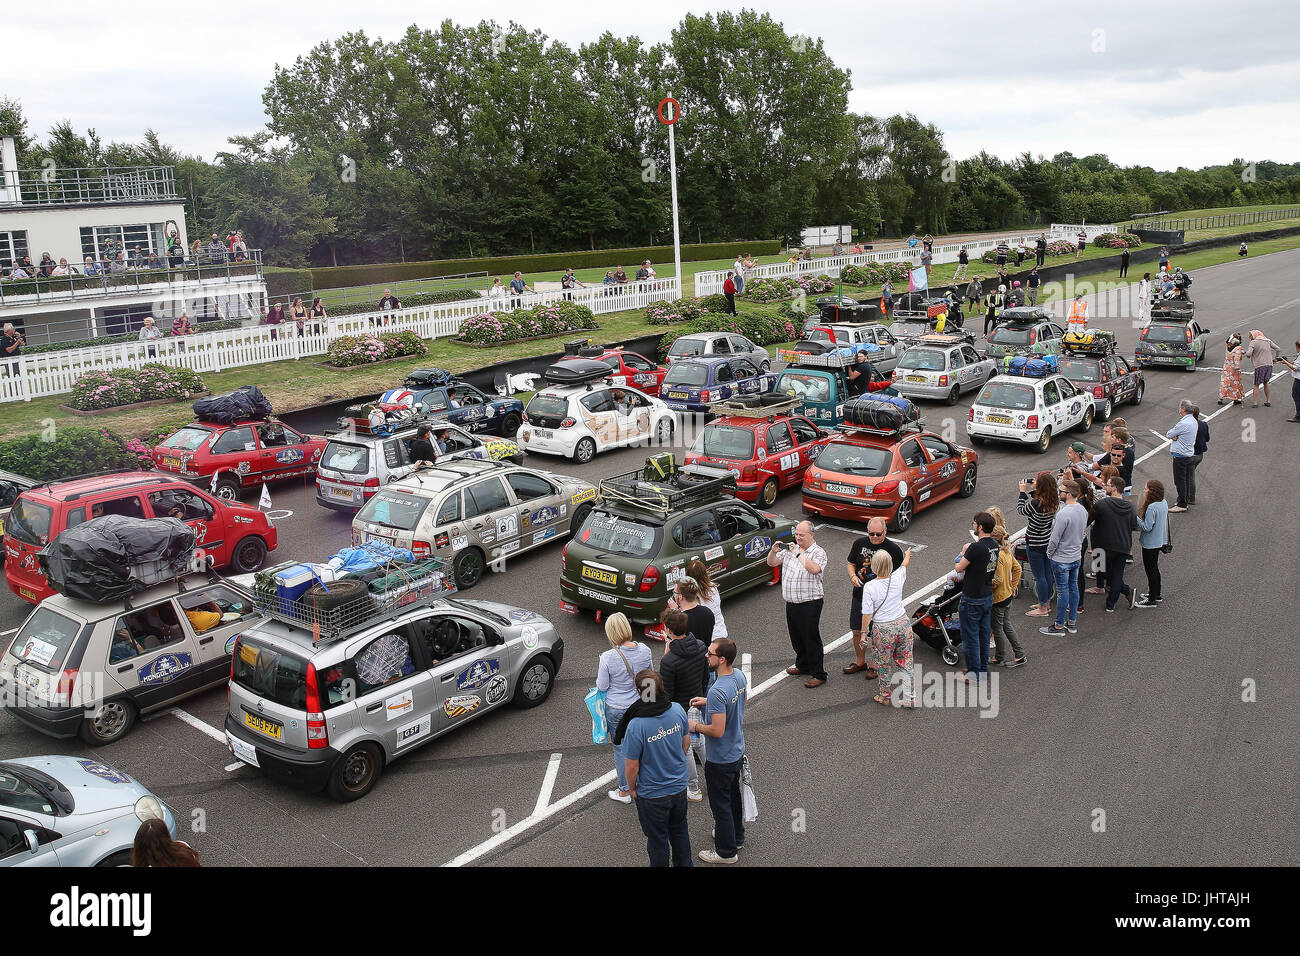 Goodwood, UK. 16th July 2017. Rally 2017: Adventurists prepare to leave the start line if the 2017 Mongol Rally. Participants cheap 1 litre cars from scrap yards and attempt to